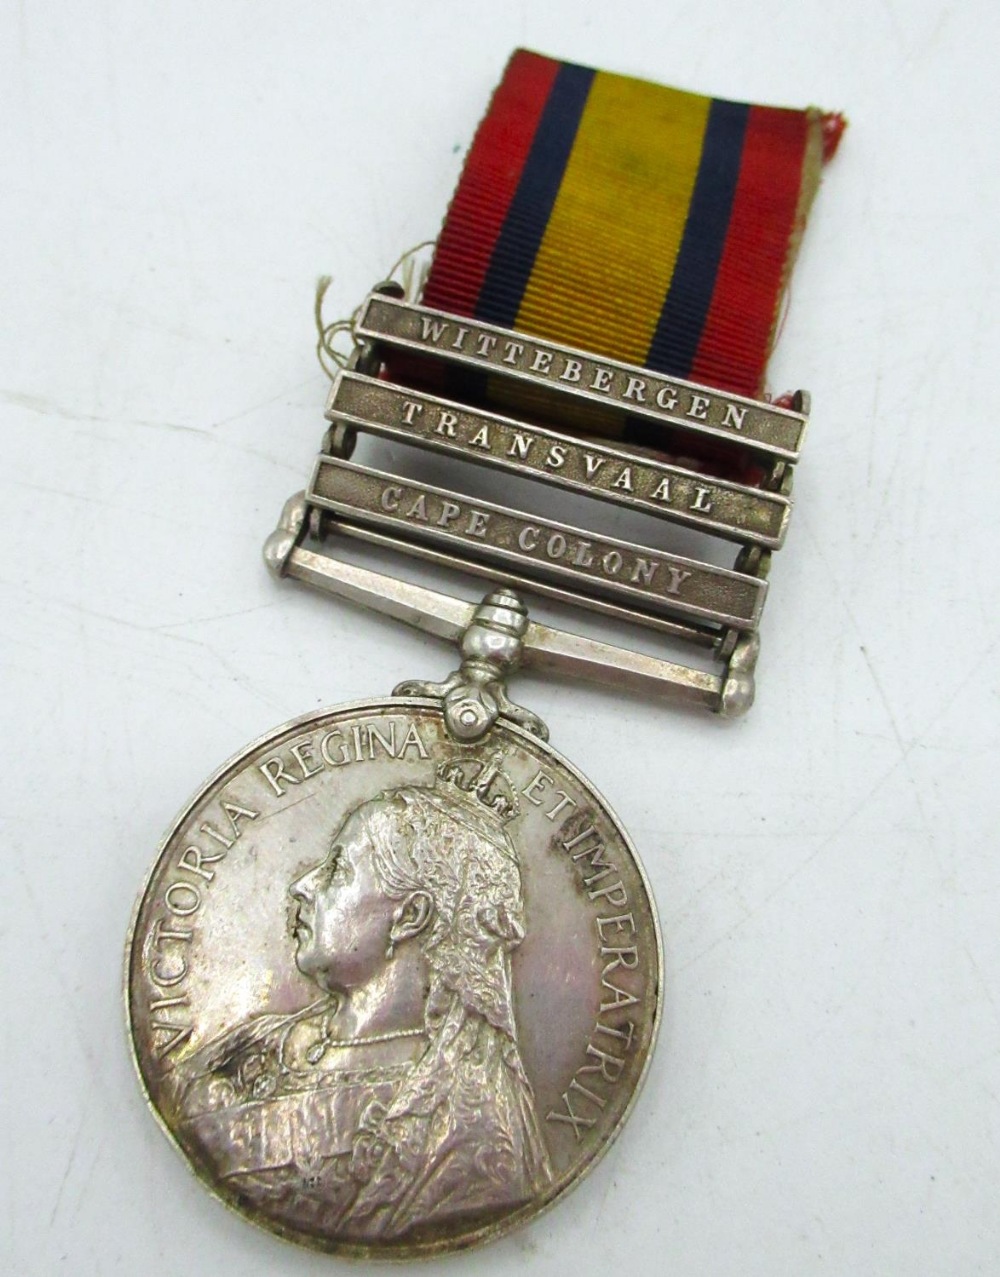 Queen's South Africa medal with Wittebergen Transvaal and Cape Colony clasps, awarded to 3248 Pte.